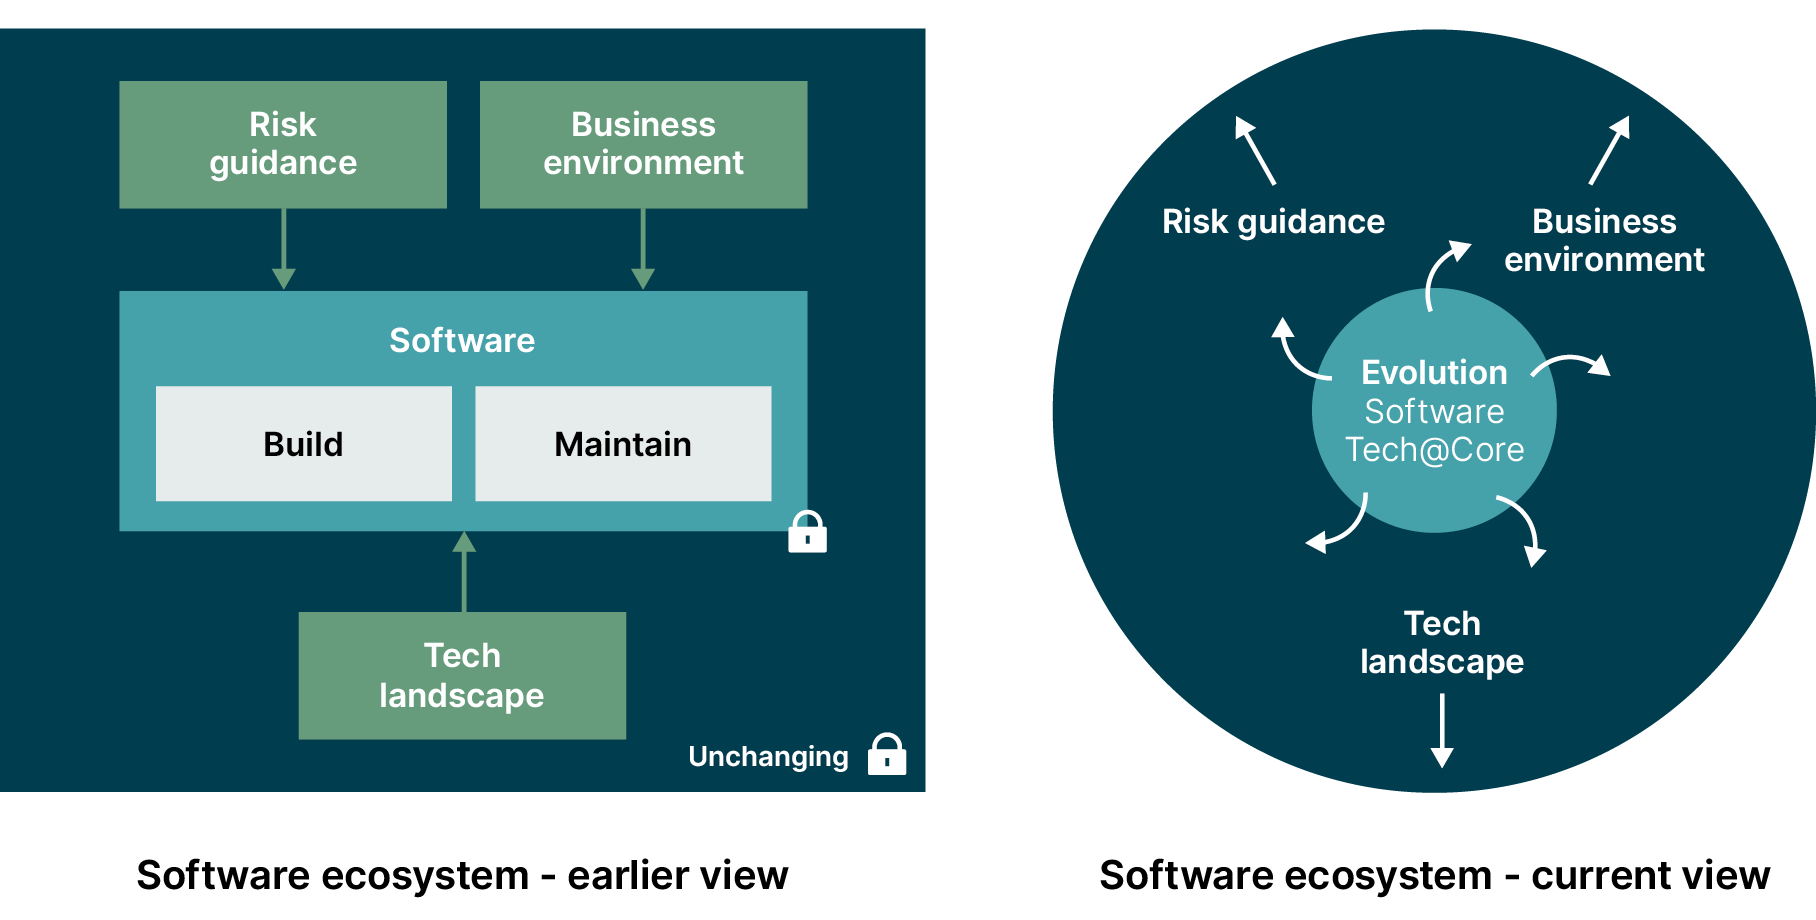 Comparing the earlier and current view of the software ecosystem. ﻿  The software ecosystem earlier view - Risk guidance, business environment and tech landscape point to software which includes build and maintain. Software has a padlock icon. All of the ecosystem is in a box with a padlock icon labelled unchanging. ﻿  The software ecosystem - current view - Evolution, software, Tech@Core is at the centre of the circle with arrows pointing outwards towards risk guidance, business environment and tech landscape which have arrows pointing outwards. All is enclosed within a circle.